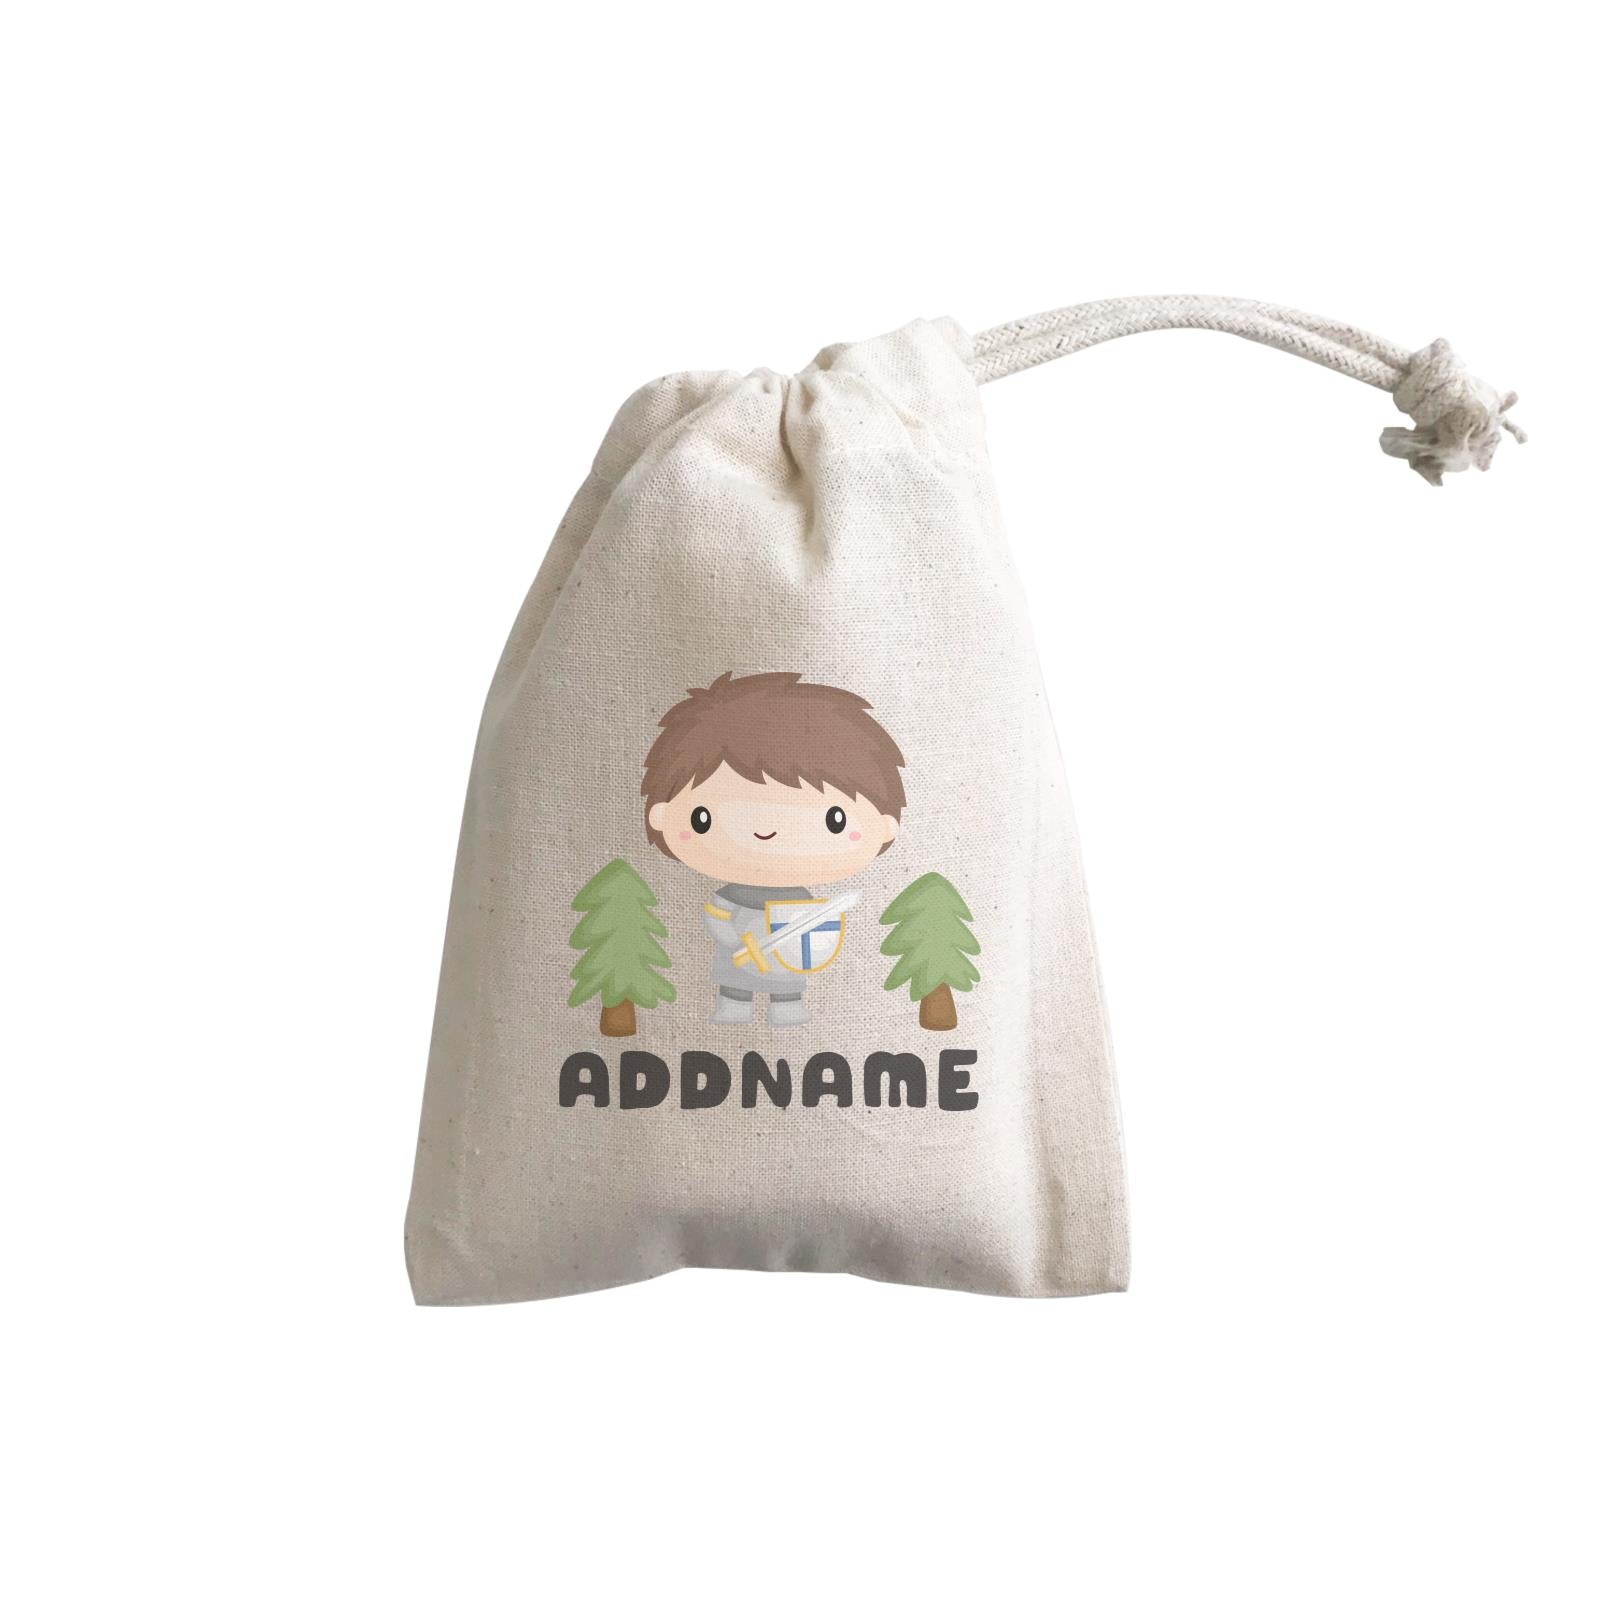 Birthday Royal Knight Boy Holding Sheild And Sword Addname GP Gift Pouch